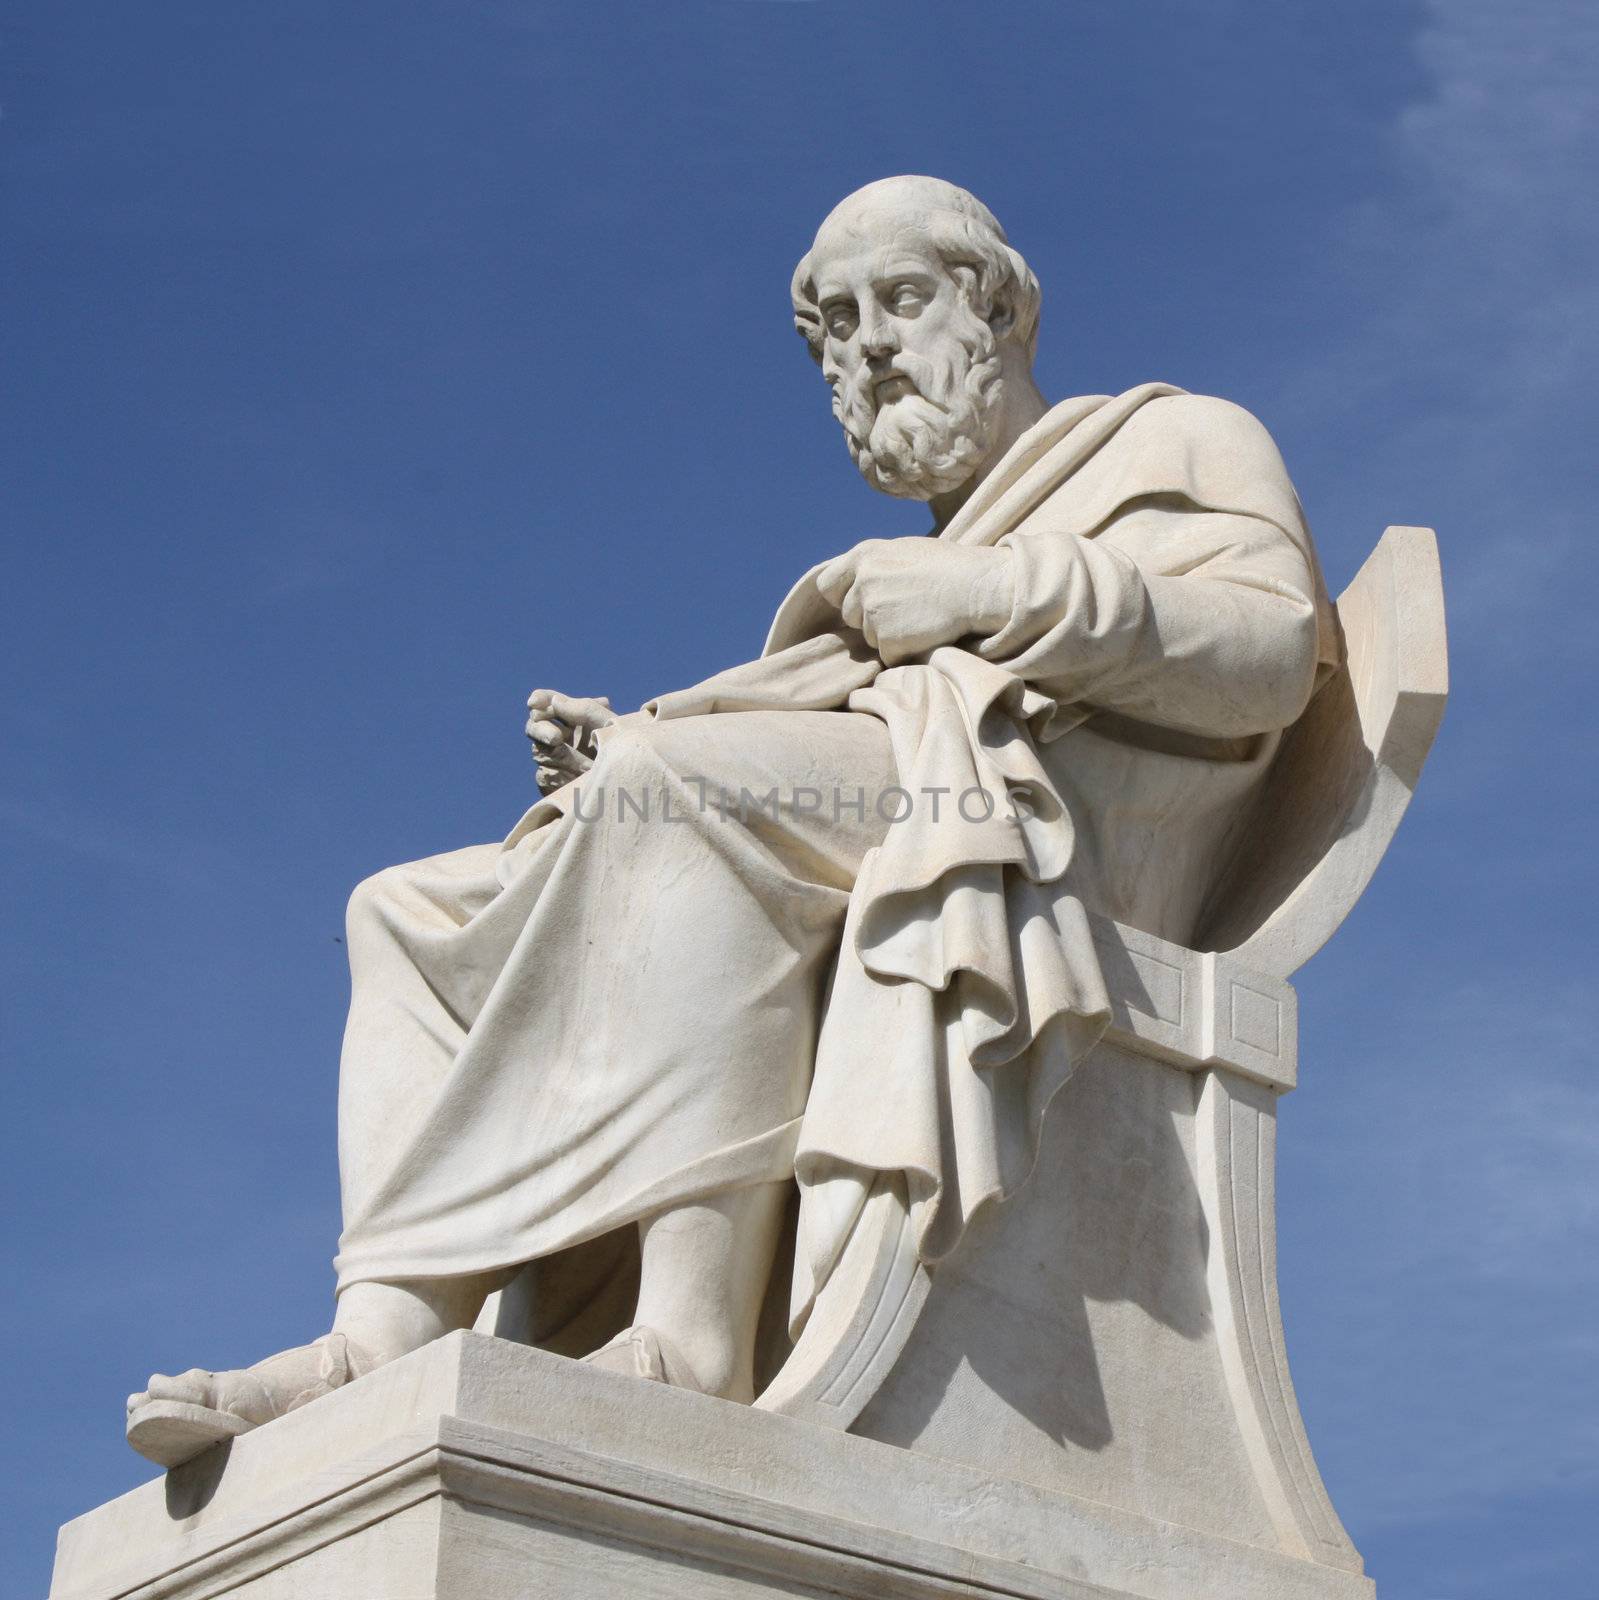 Neoclassical statue of ancient Greek philosopher, Plato, in front of the Academy of Athens in Greece.